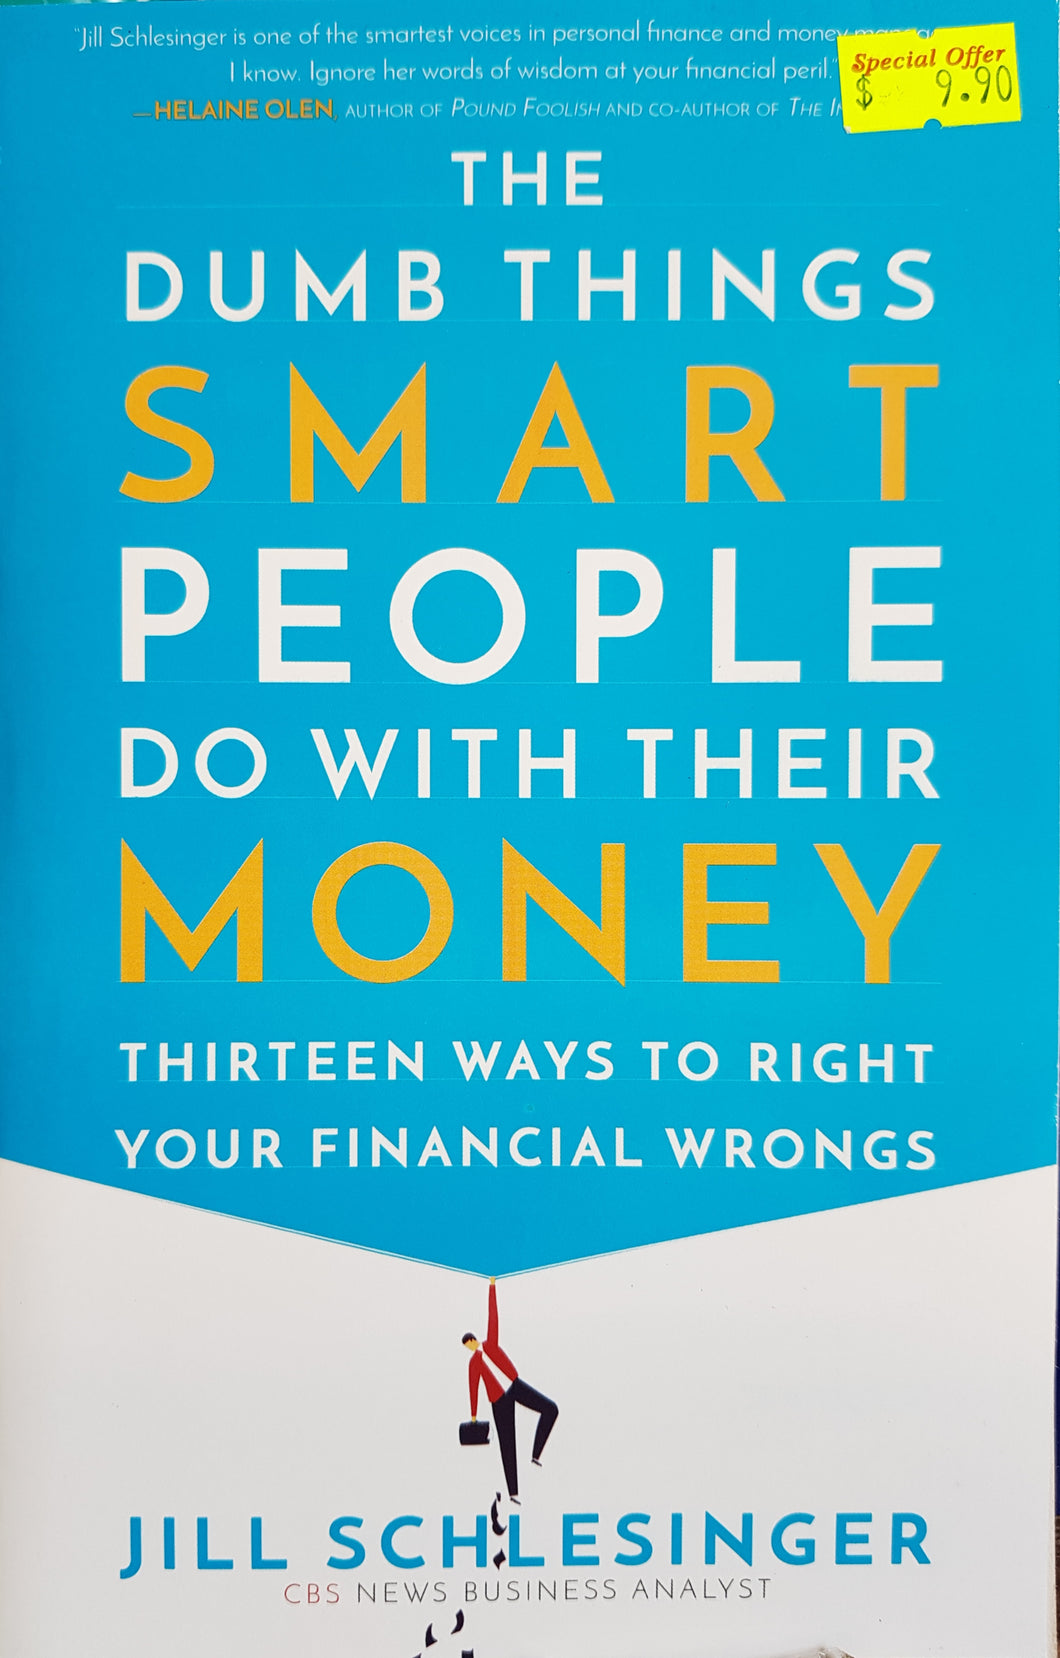 The Dumb Things Smart People Do with Their Money - Jill Schlesinger